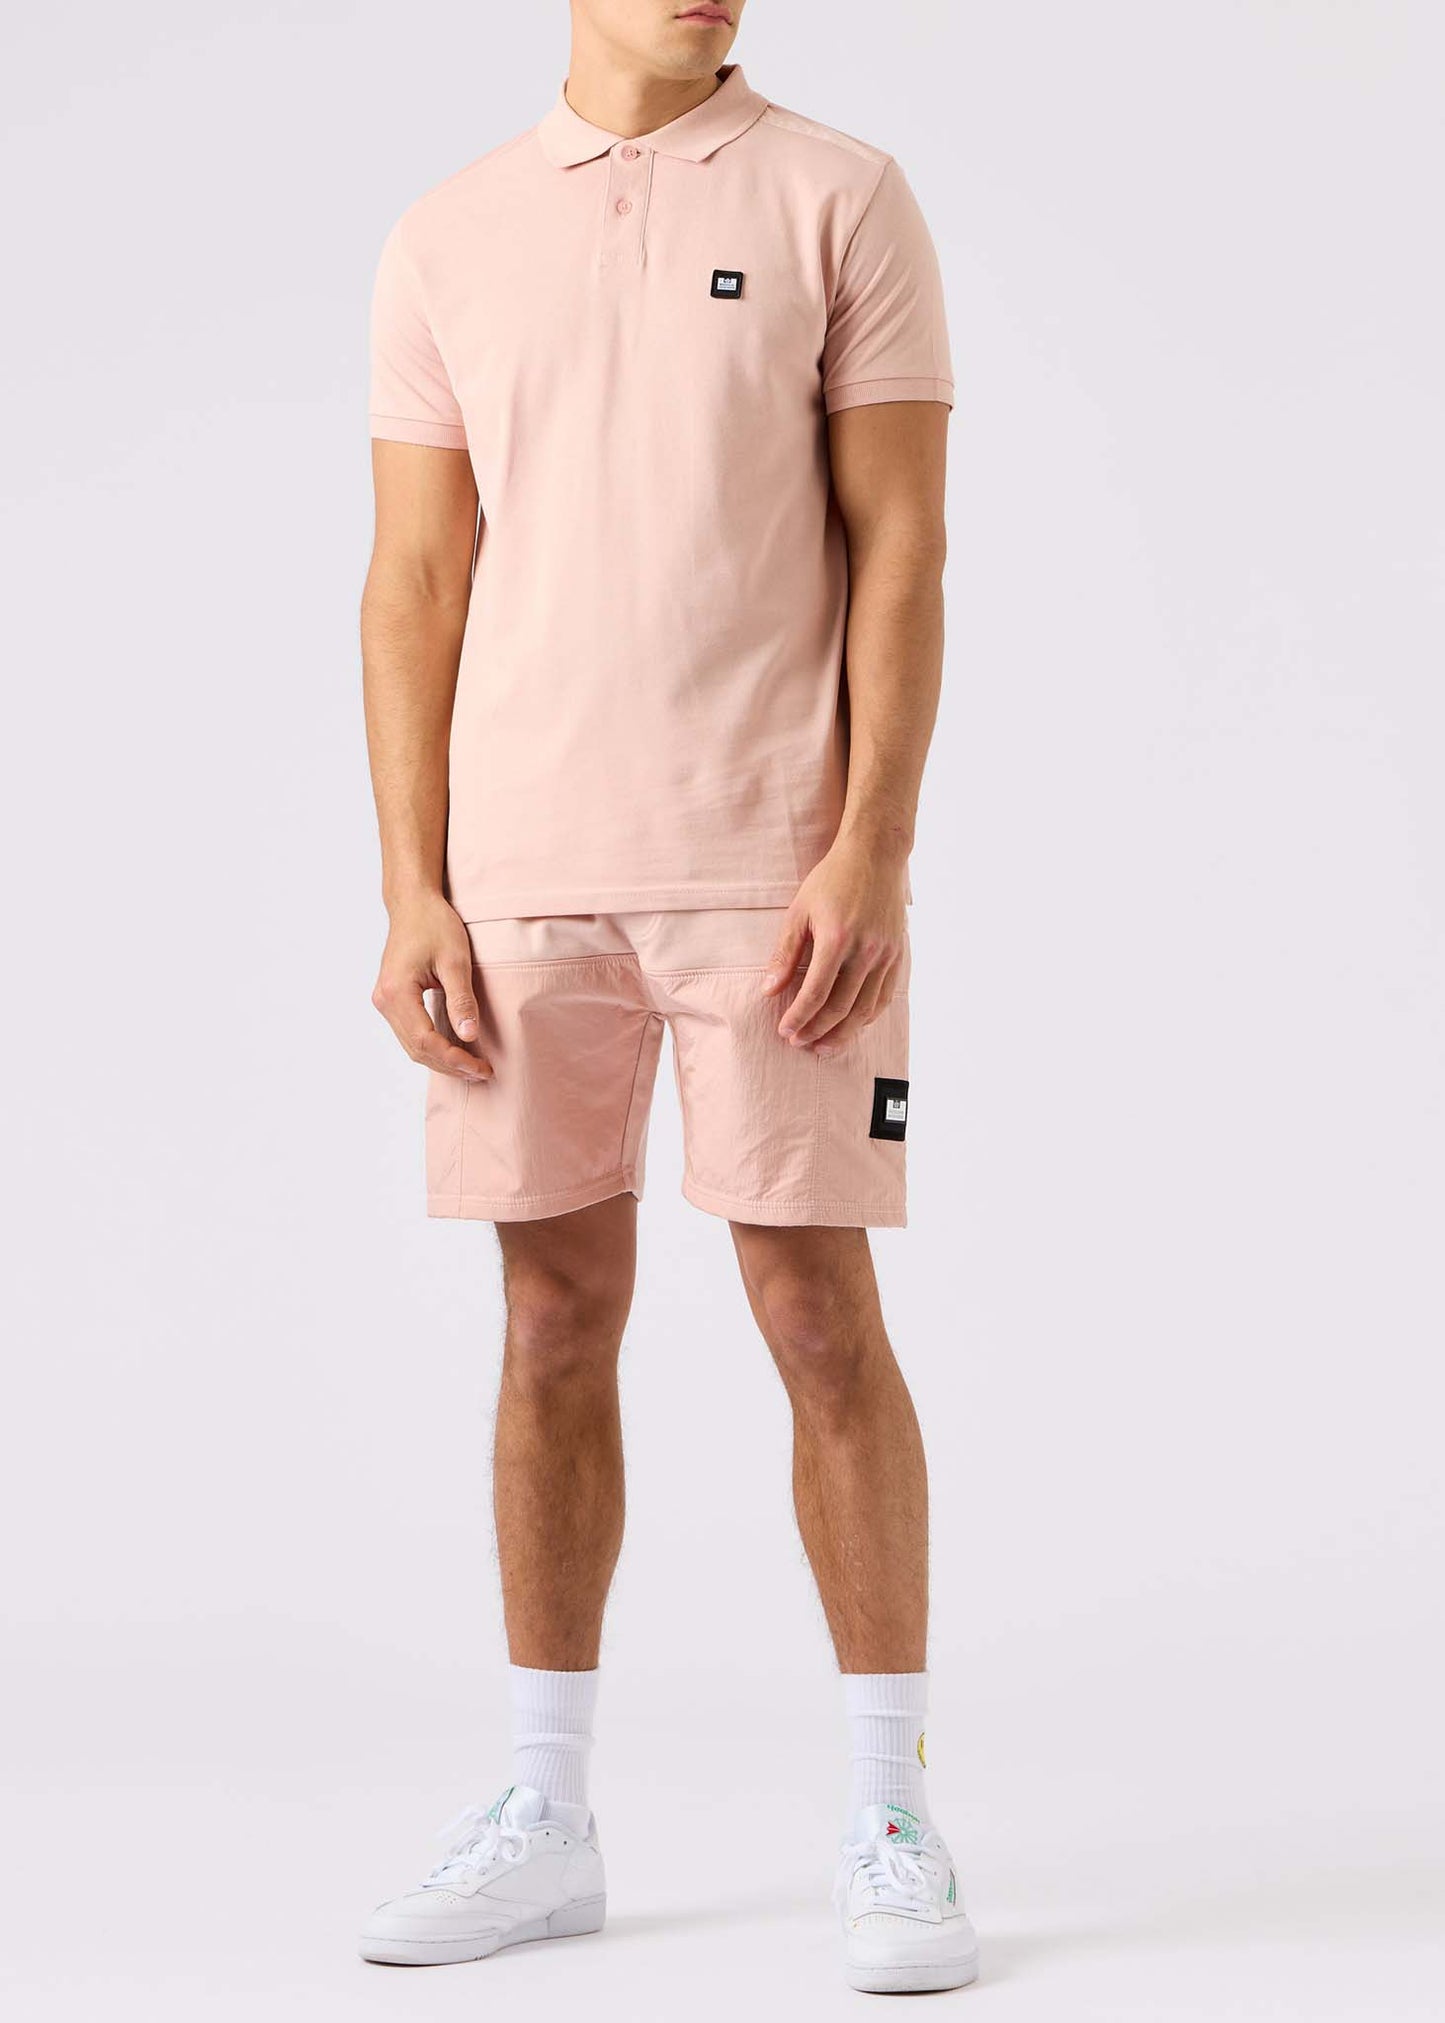 Weekend Offender polo pink roze